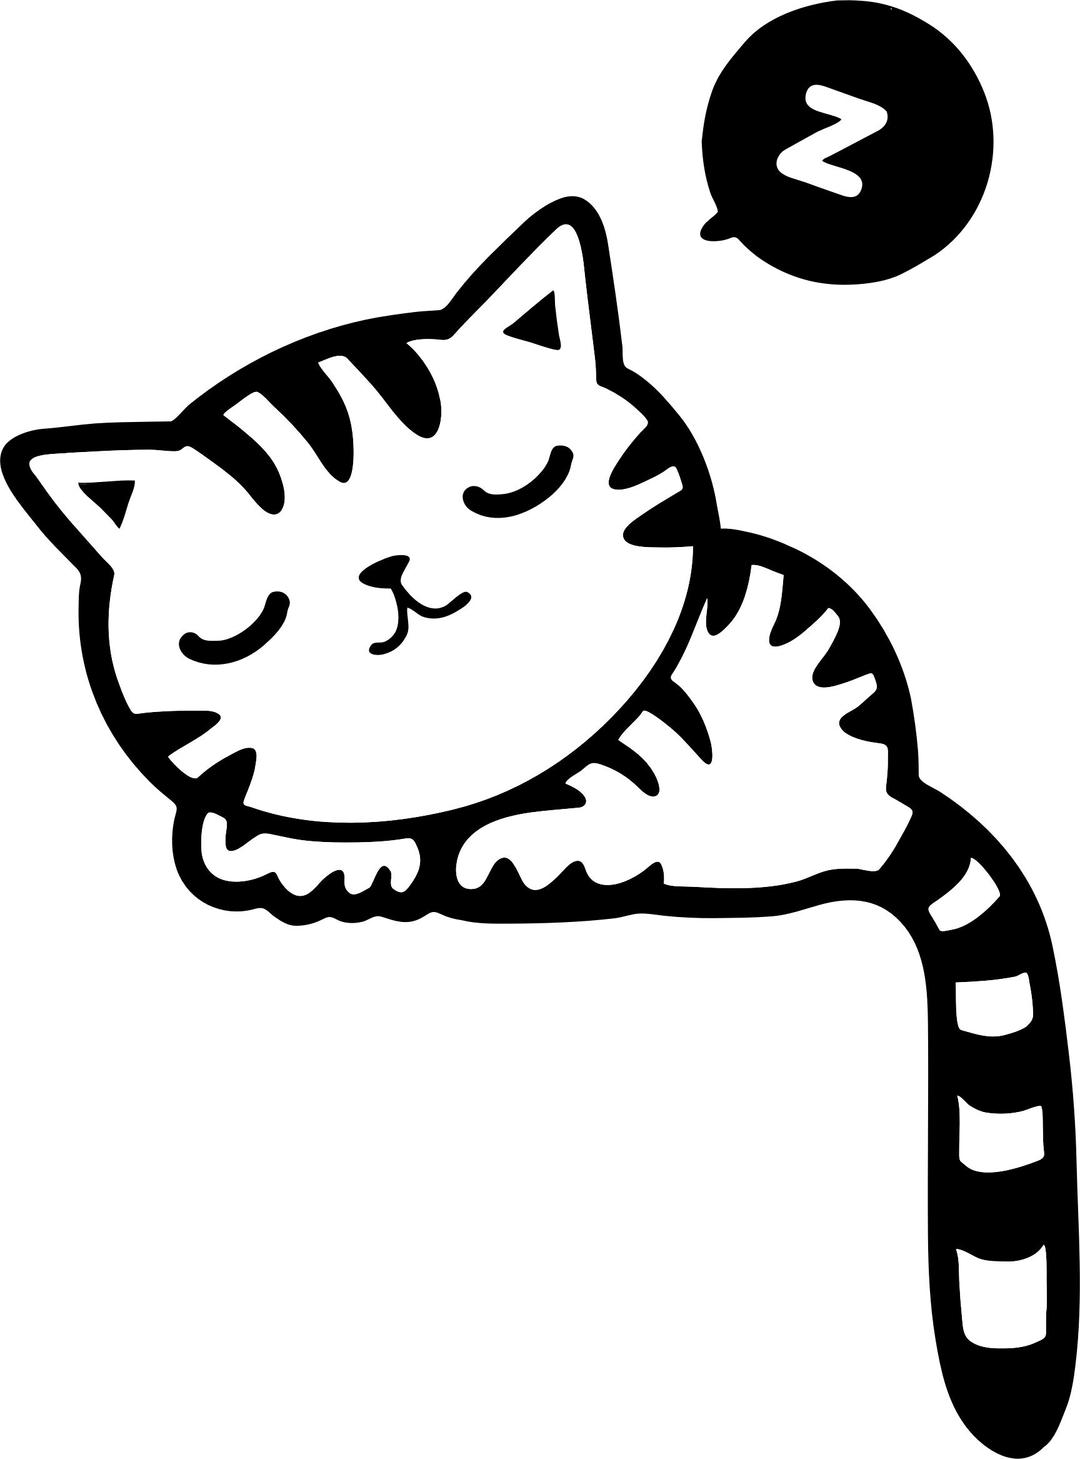 Sleeping Kitty png transparent